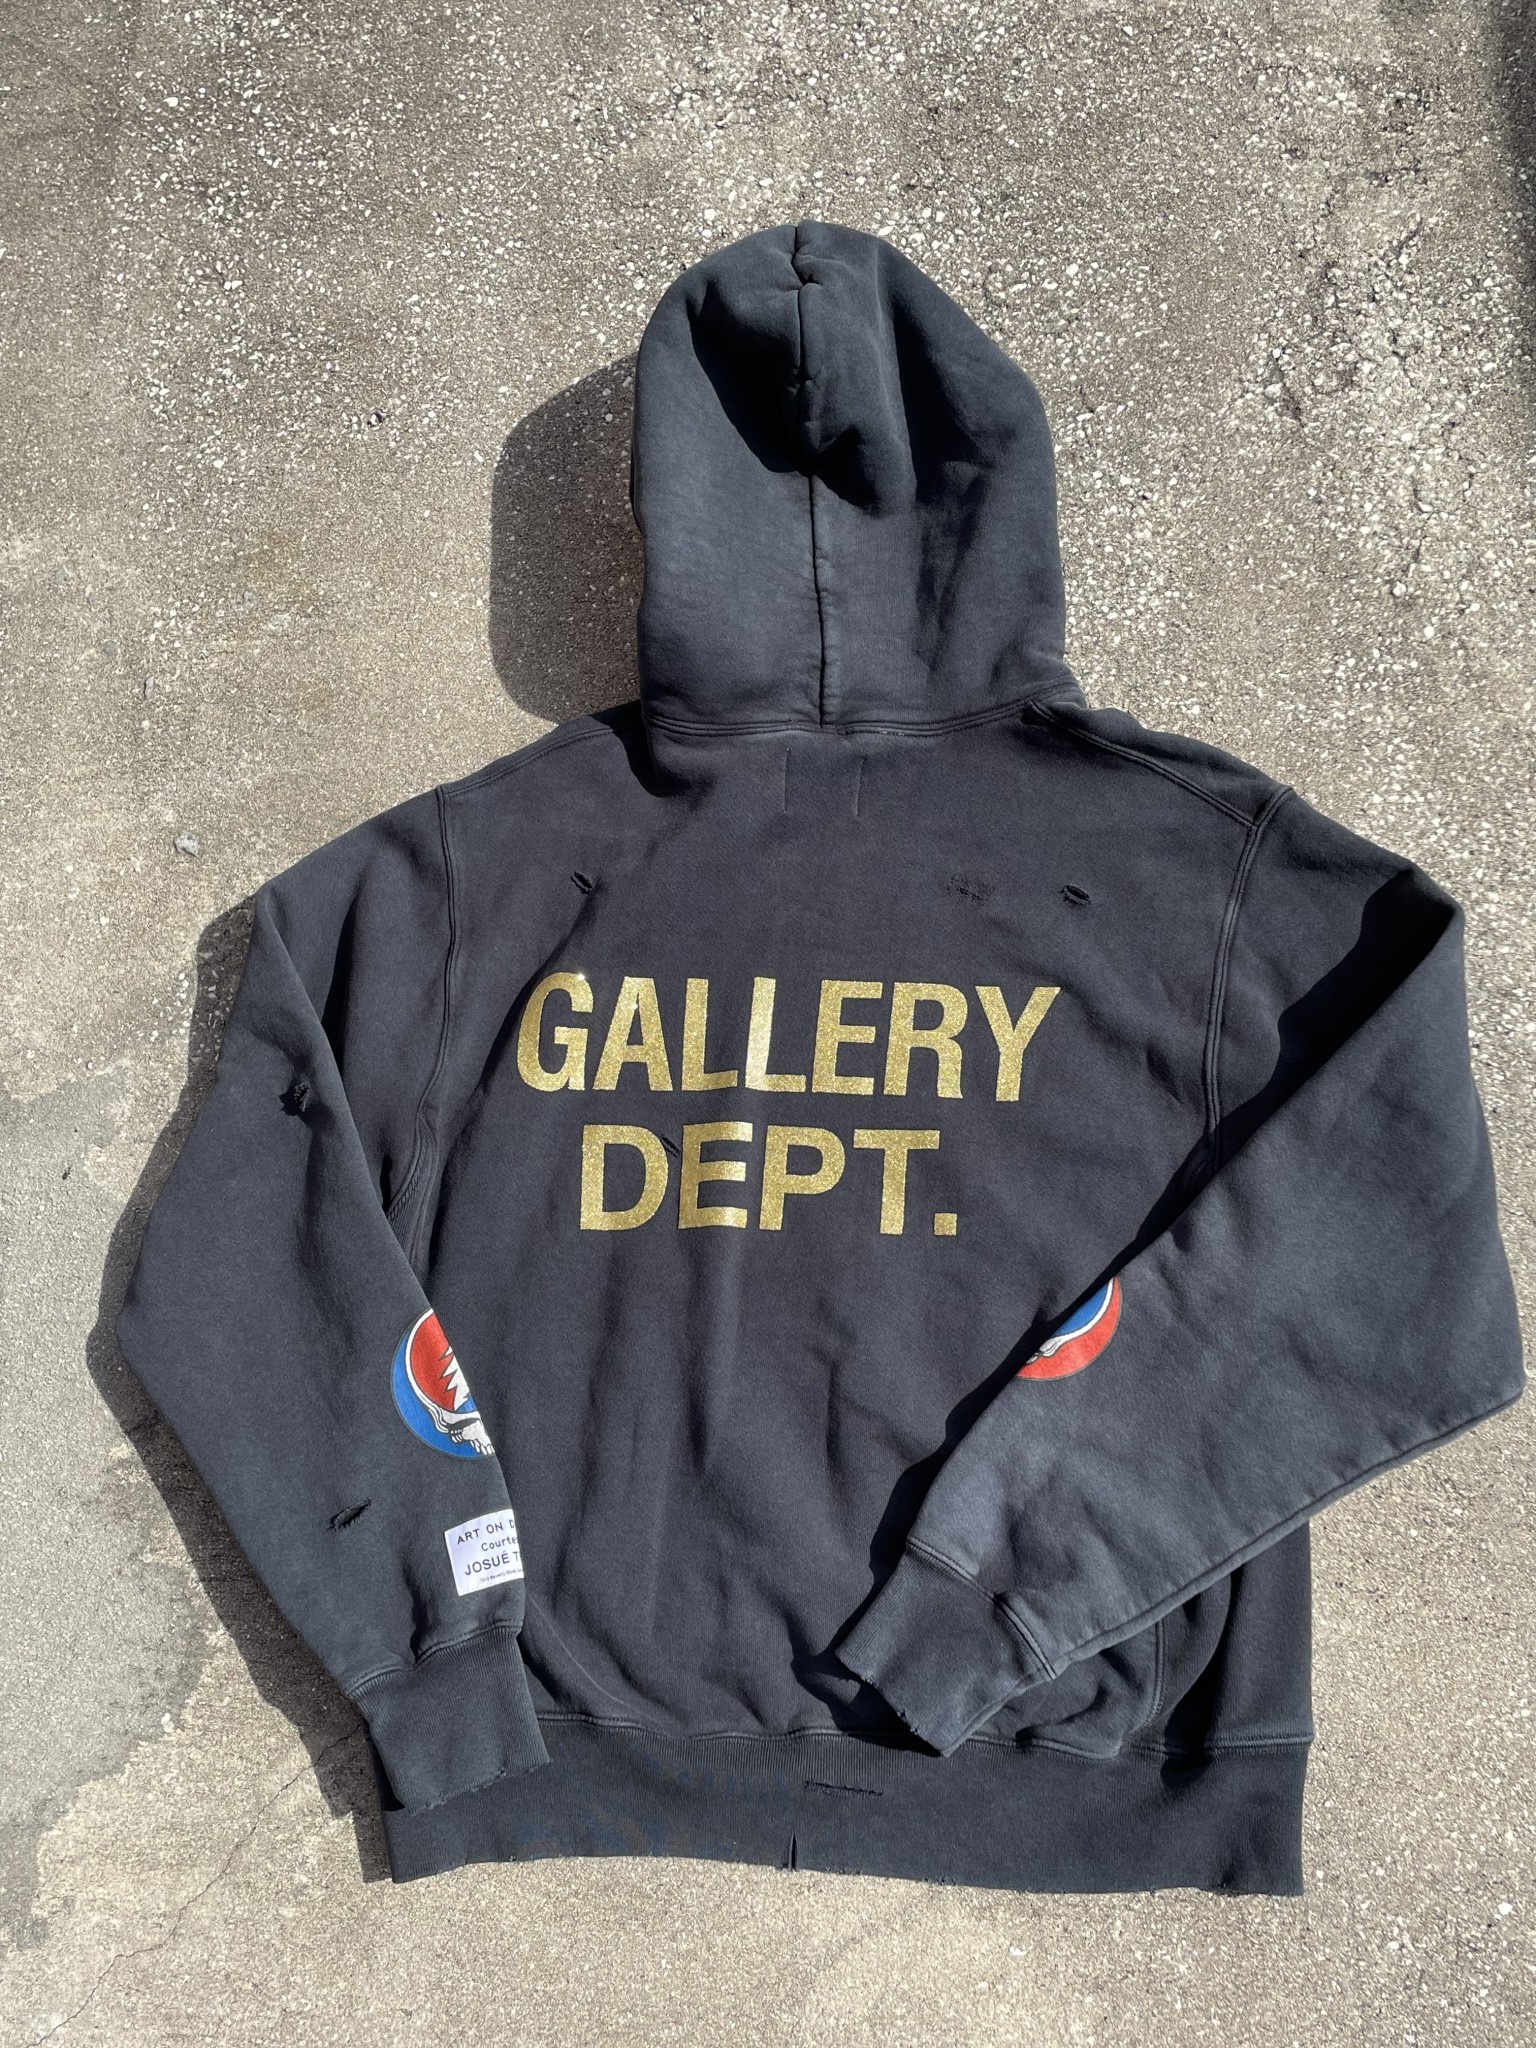 The Gallery Dept Hoodie and the Rise of Fashion-Music Collabs: A Look at Collaborations and Fan Engagement插图